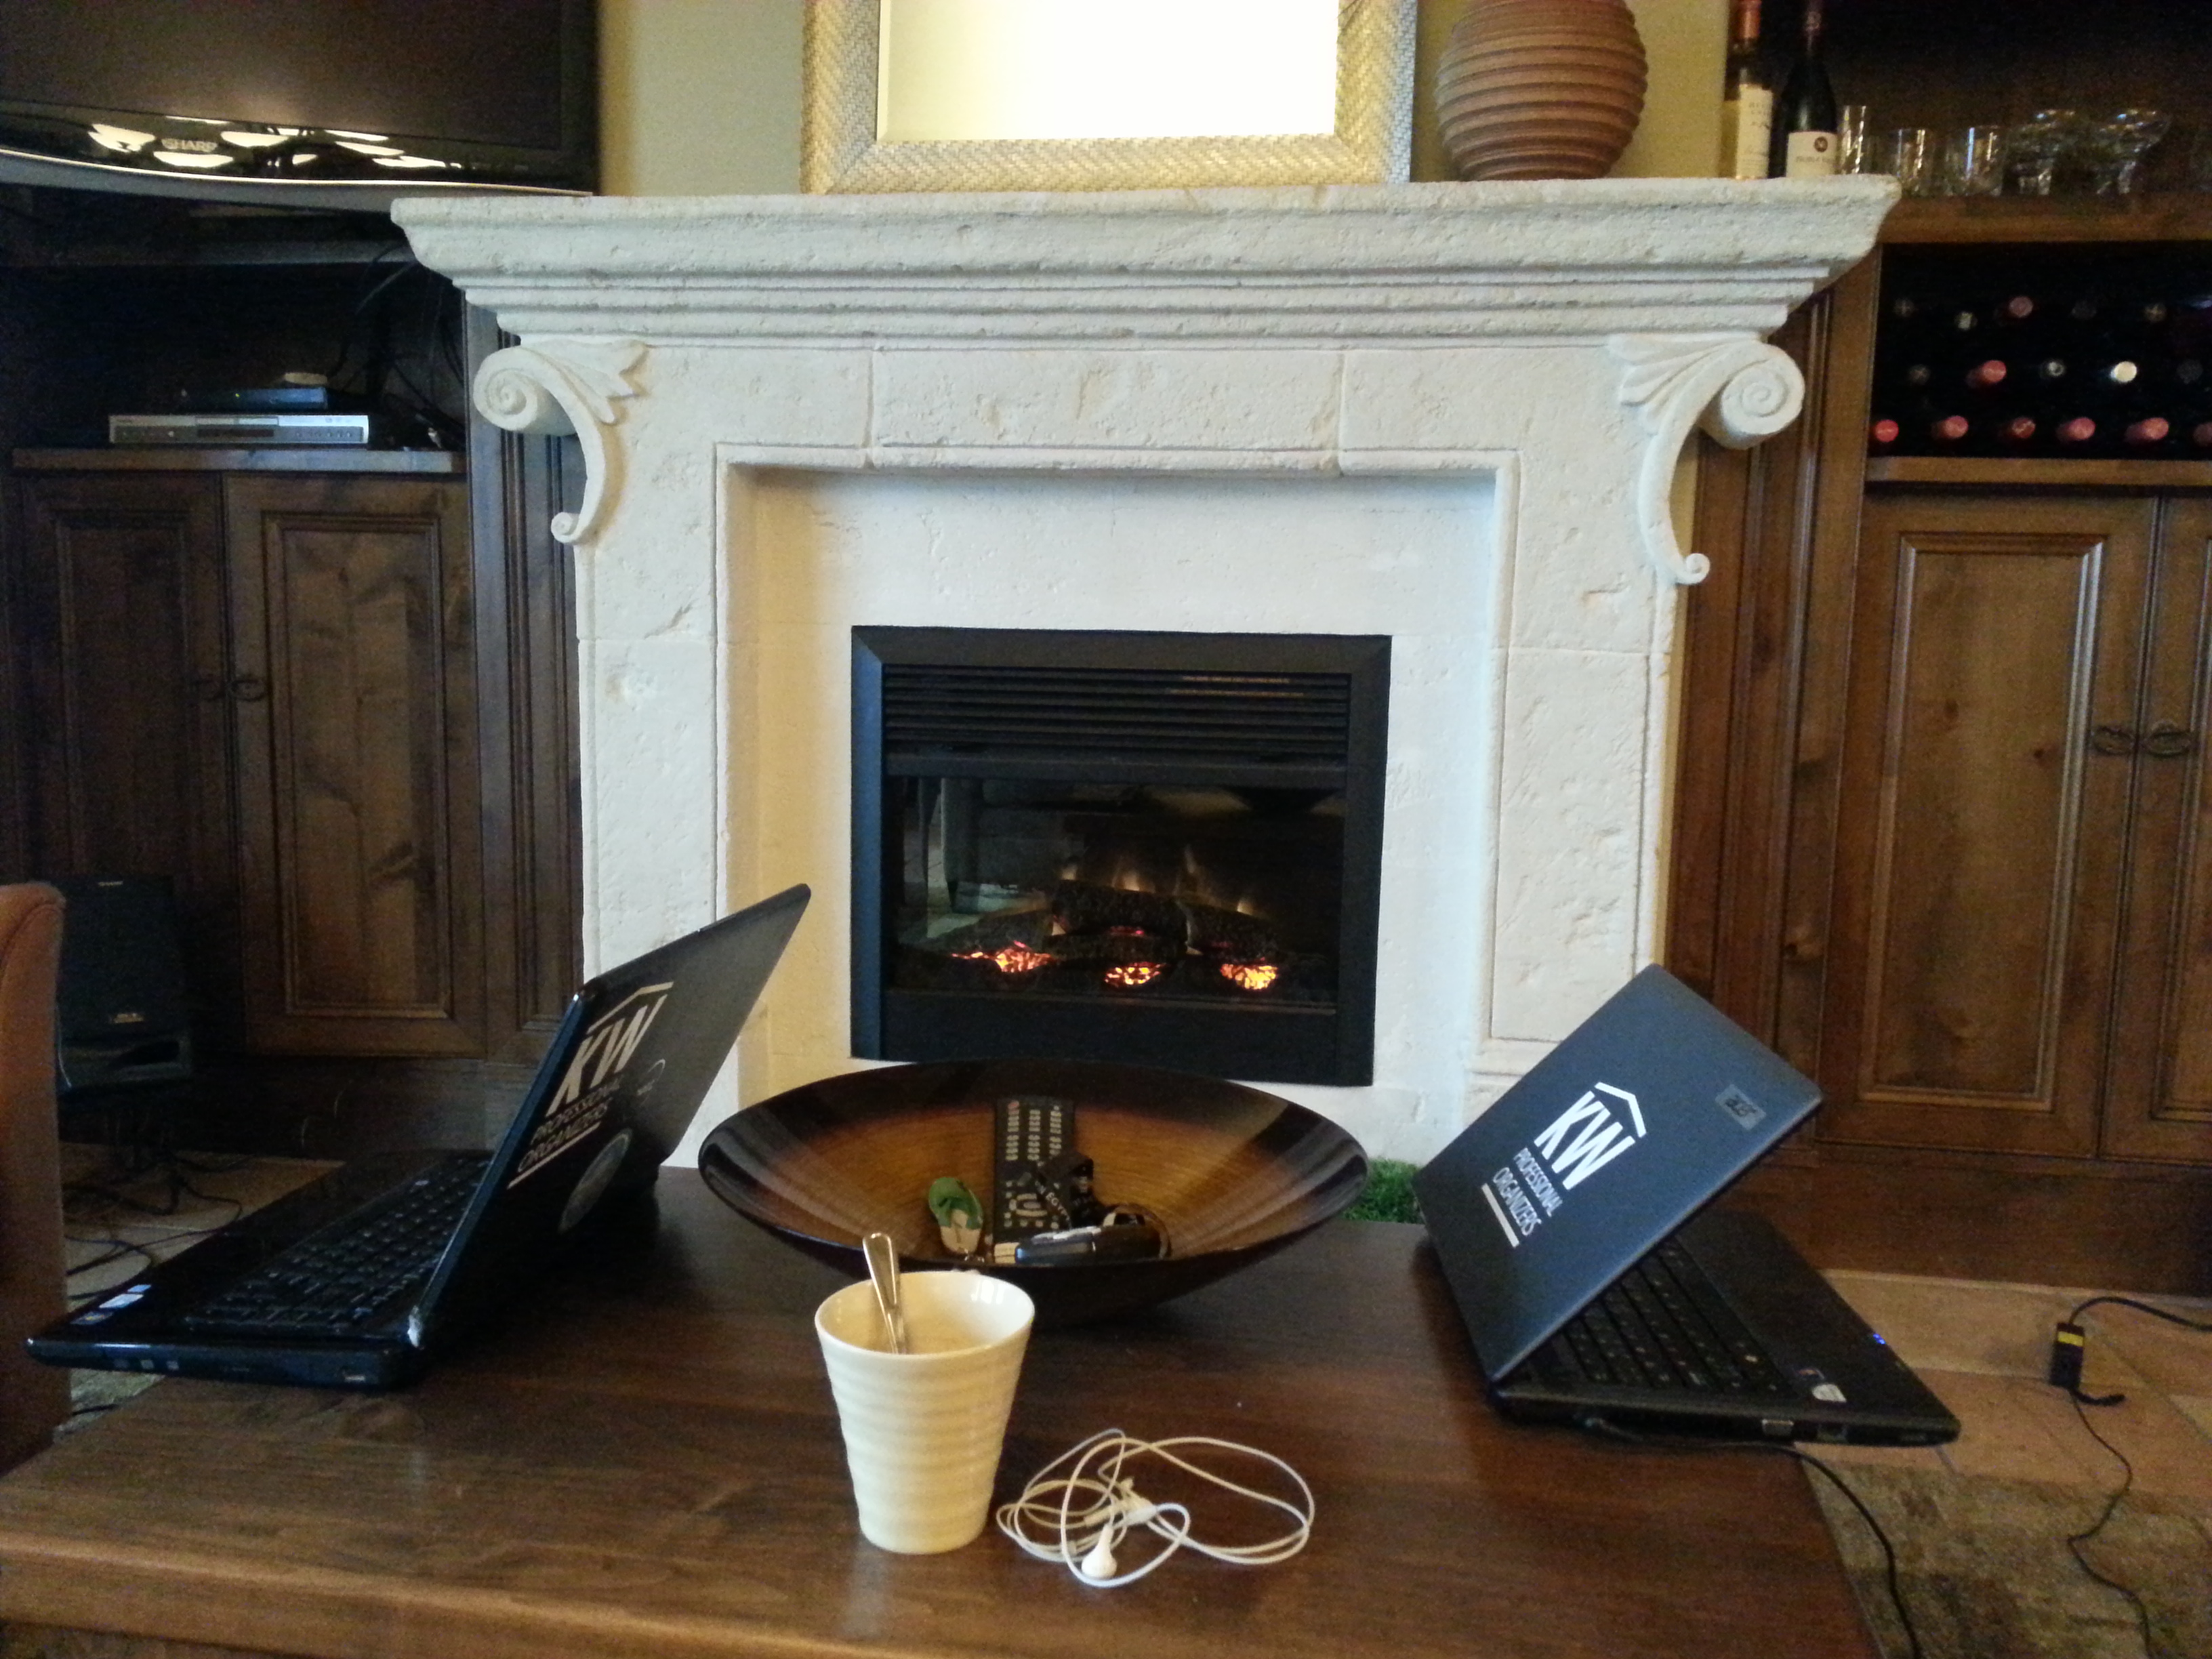 twoclearing digital clutter like laptops in front of fireplace coffee mug